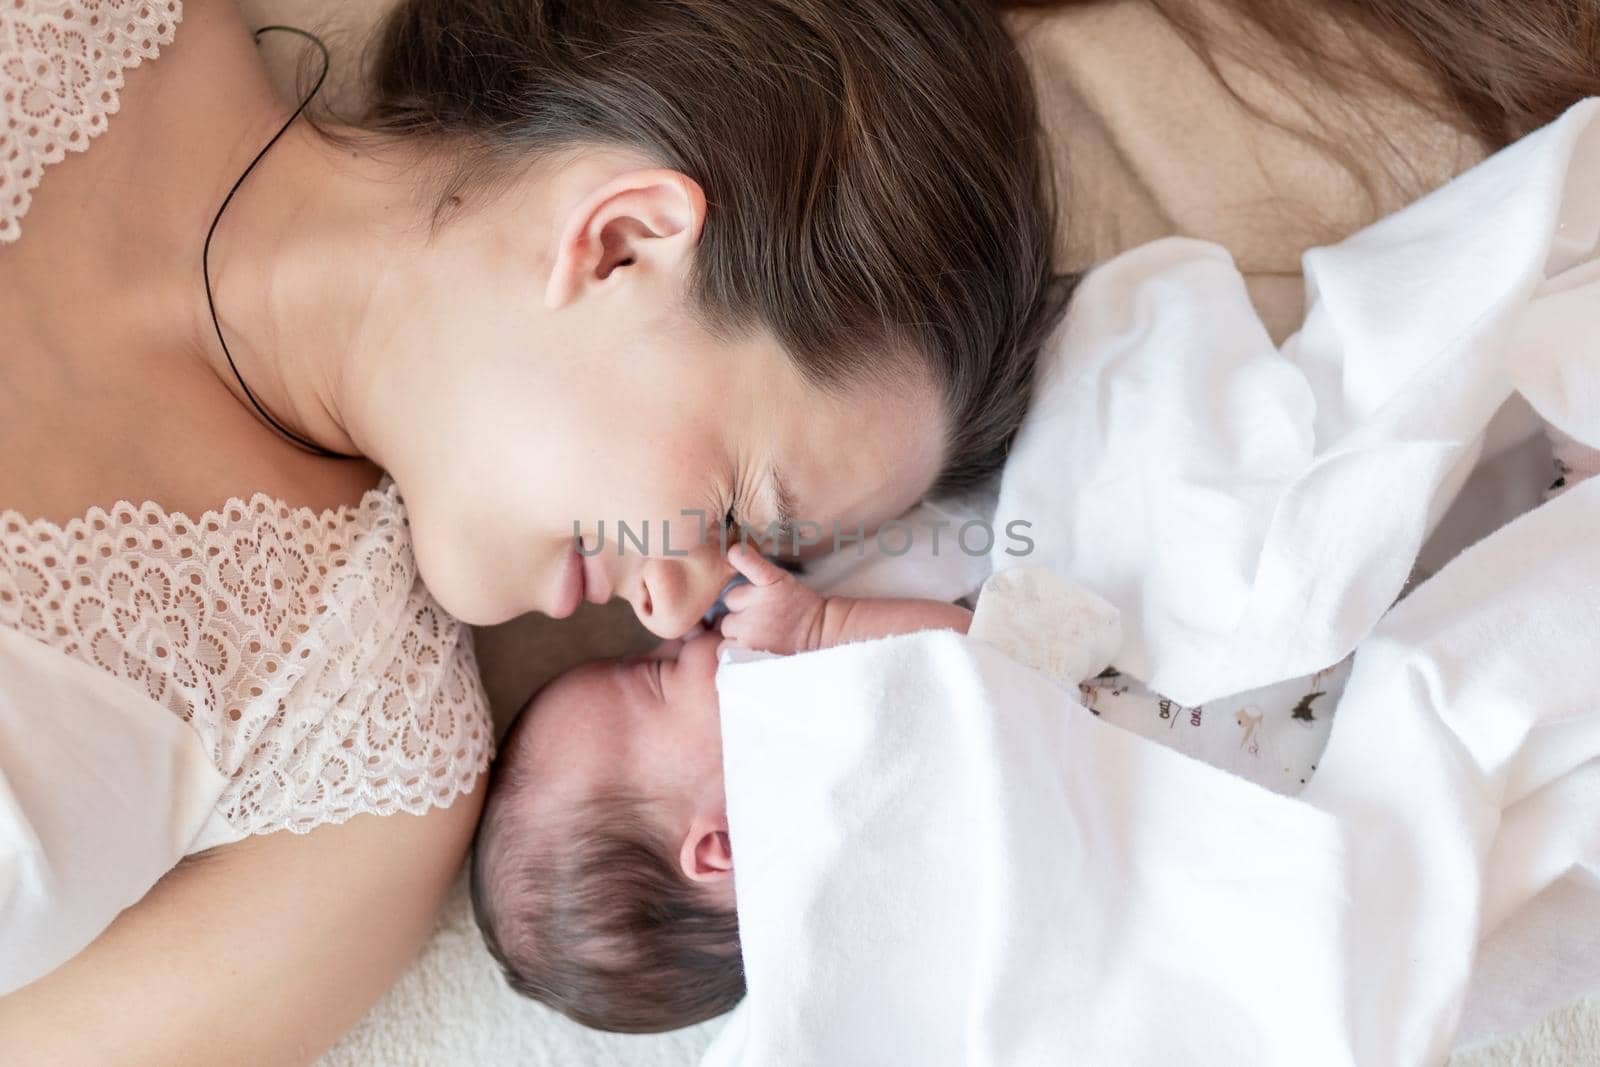 motherhood, infancy, childhood, family, care, medicine, sleep, health, maternity concept - portrait of mom with newborn baby wrapped in diaper on white background, place for text, close-up, soft focus by mytrykau